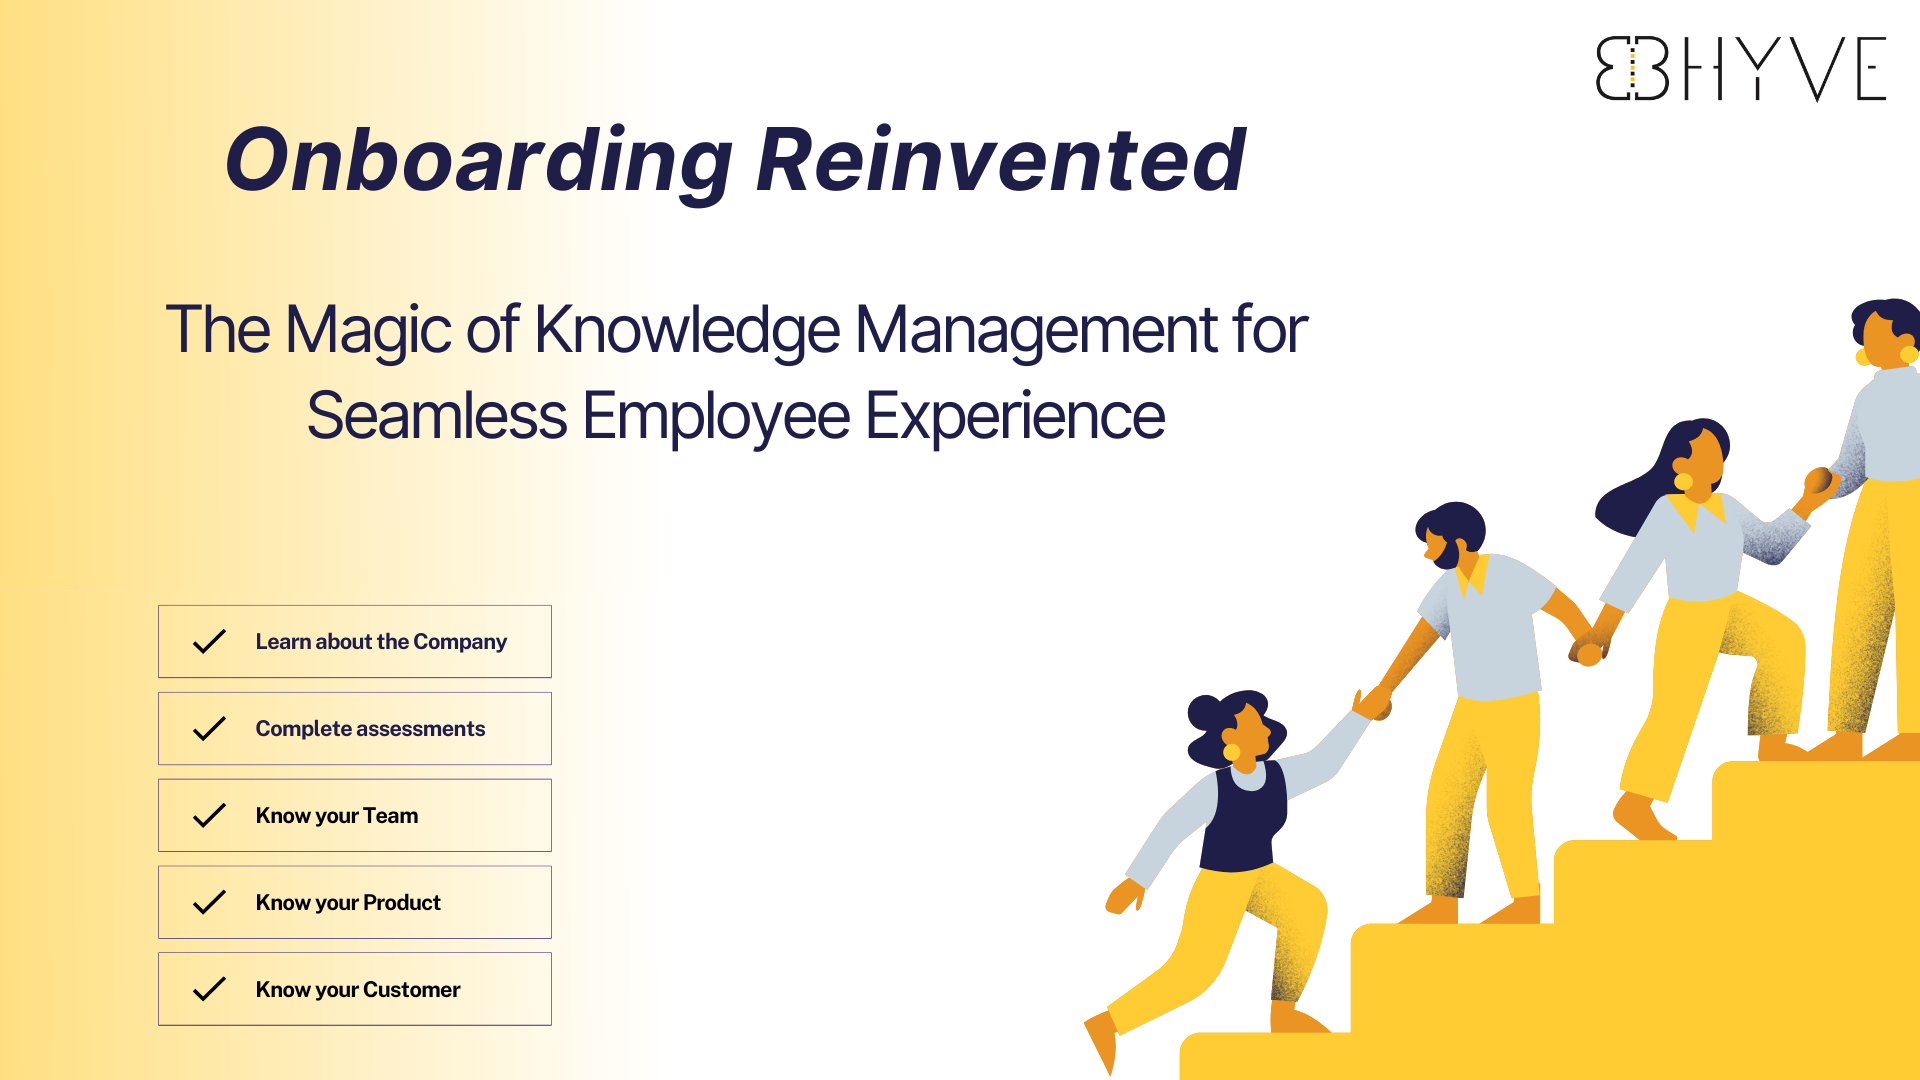 Cover Image for Onboarding Reinvented: Knowledge Management for Seamless Employee Experience